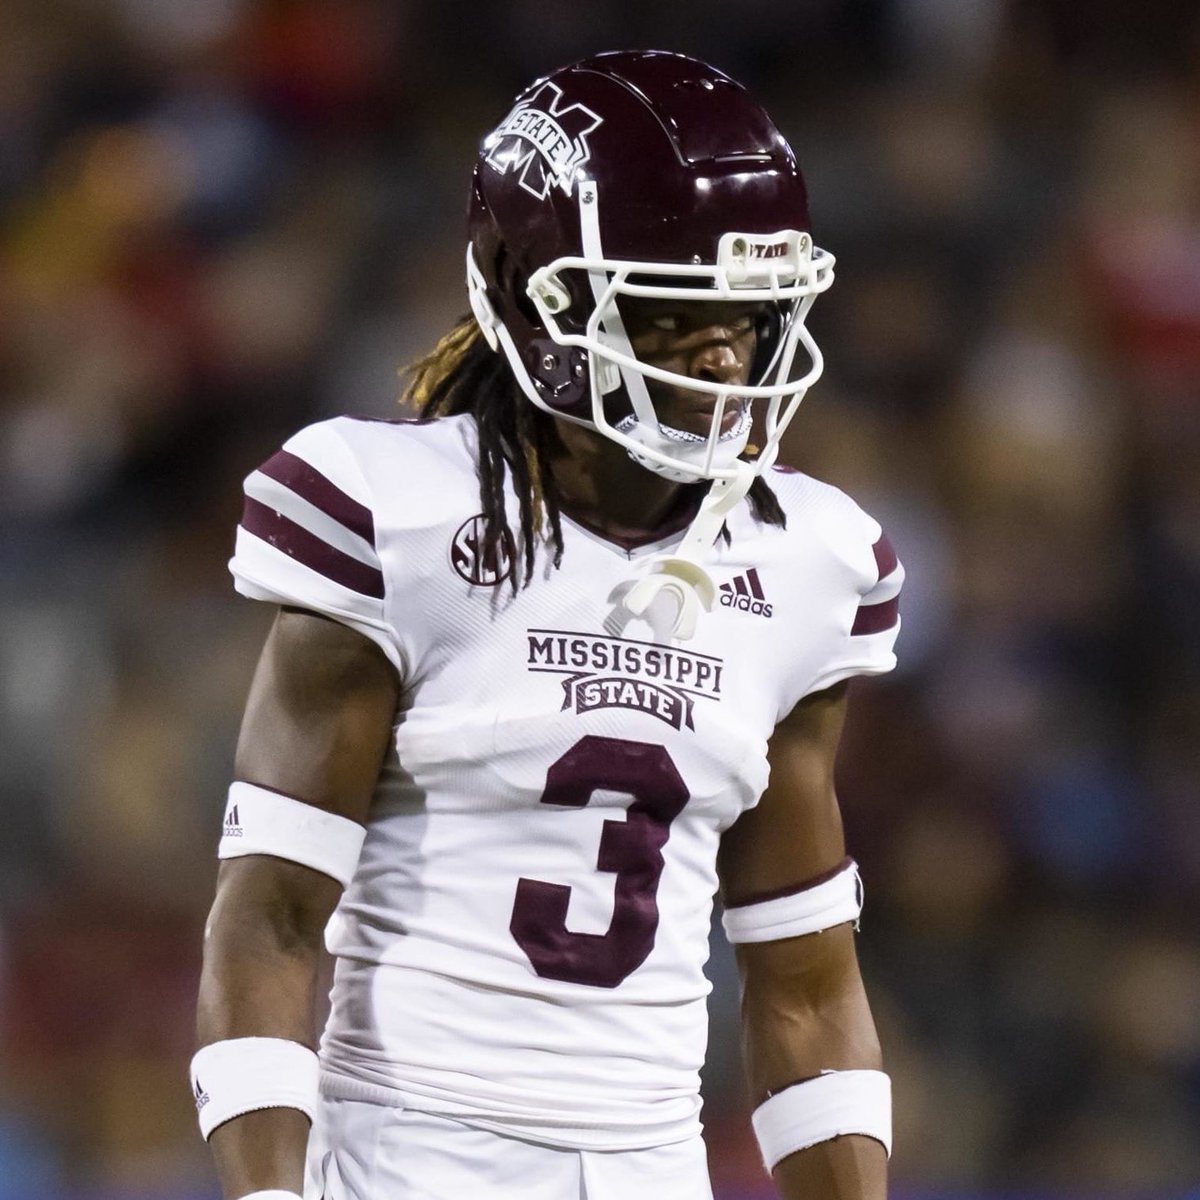 The #Browns will meet with CB Decamerion Richardson from Mississippi State this week. 

Richardson:
- 6’2” 188, 23 yo
- 4.34 40-yard dash
- 2023: 12 games, 79 tackles 👀, 7 PBU, 0 INT
- 90.3 PFF tackle grade (highest among SEC corners in 2023)
- 86.4 PFF defense grade (4th among…